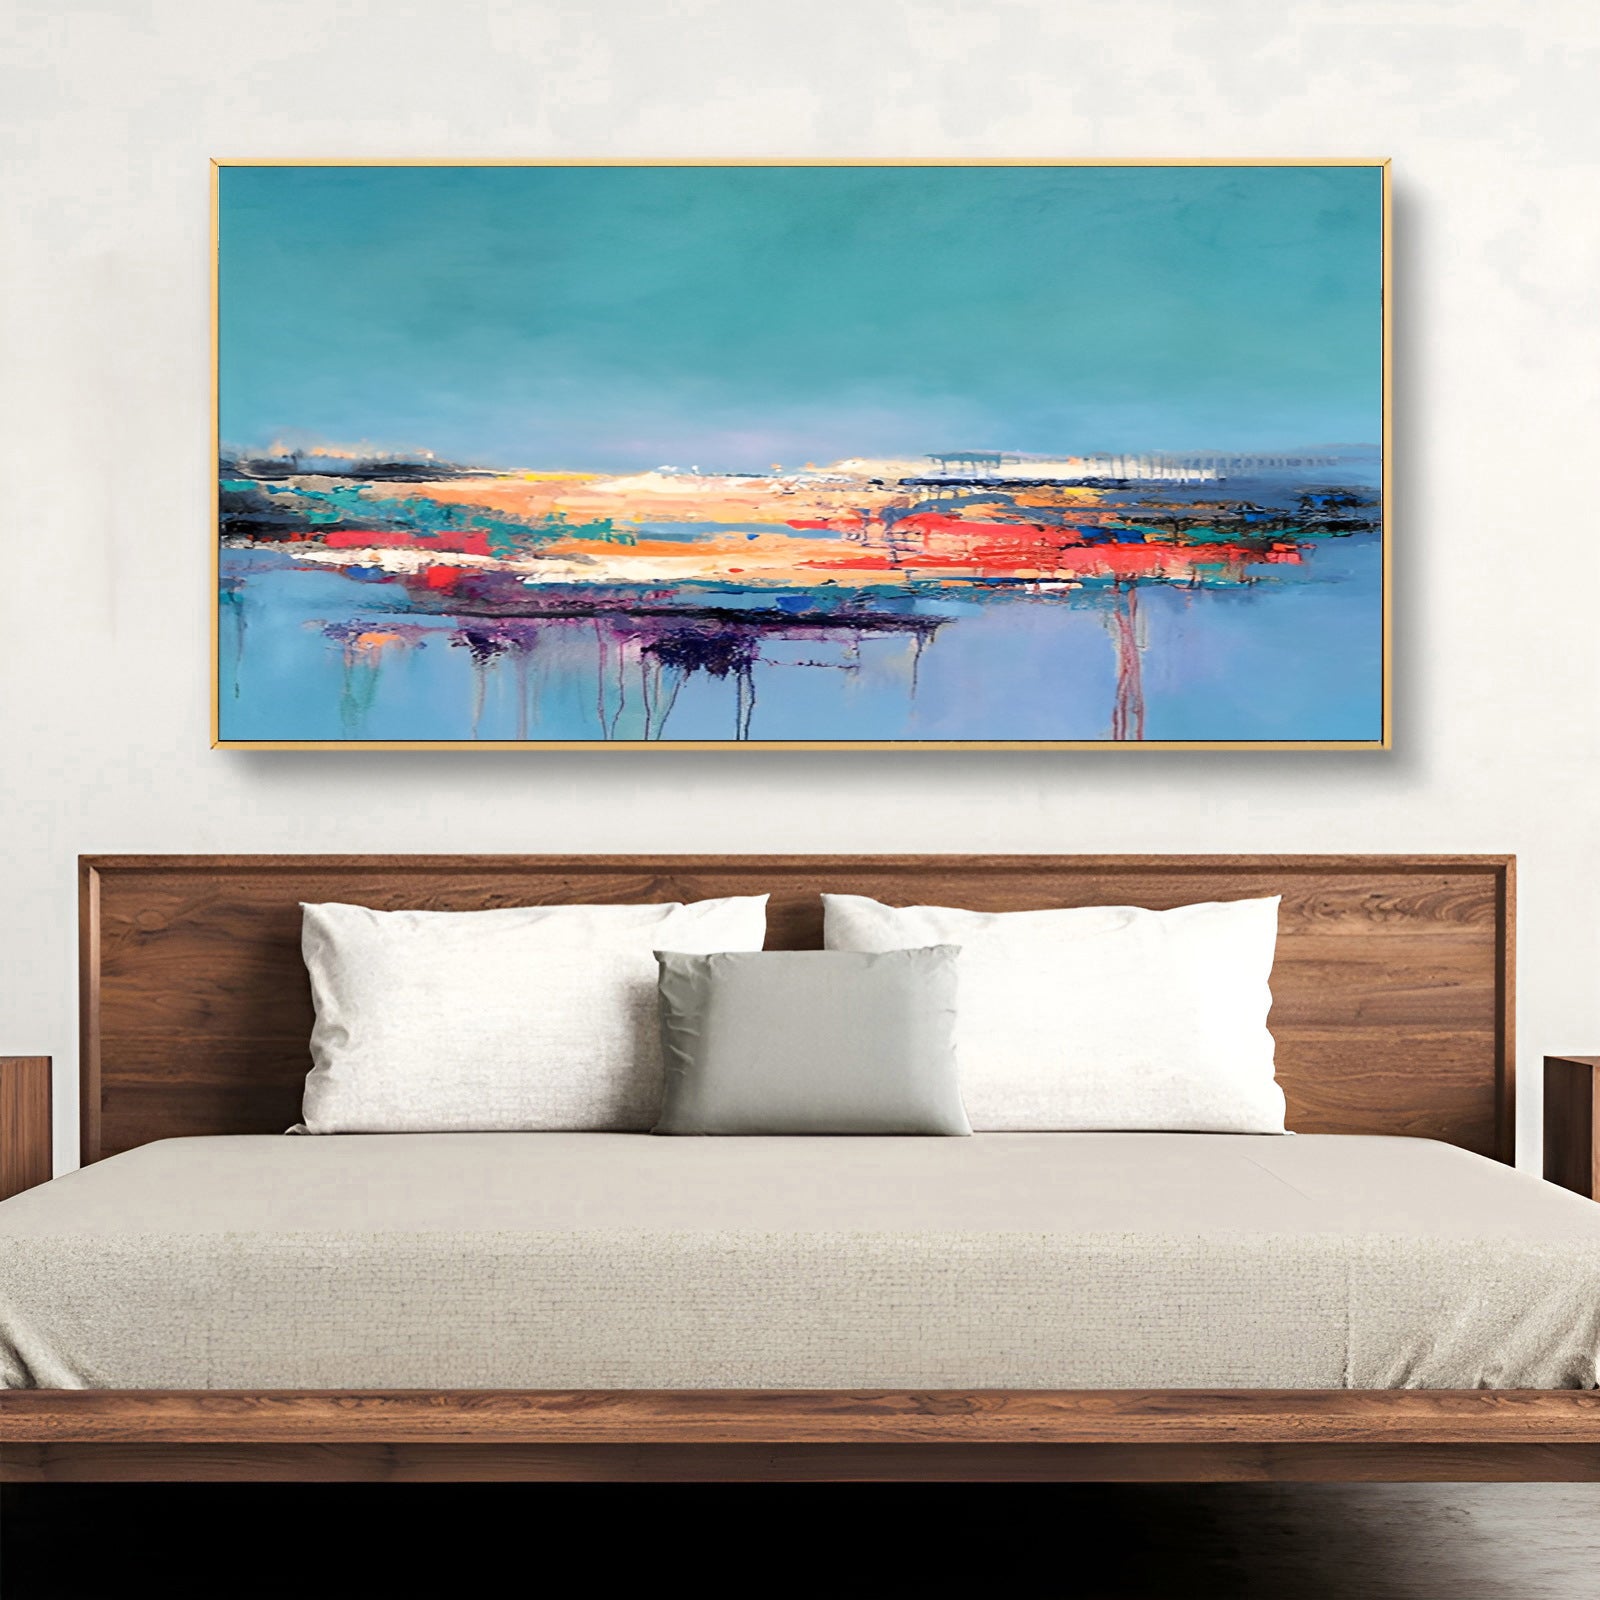 Bay - Large Abstract Blue Seascape Painting on Canvas N o H o